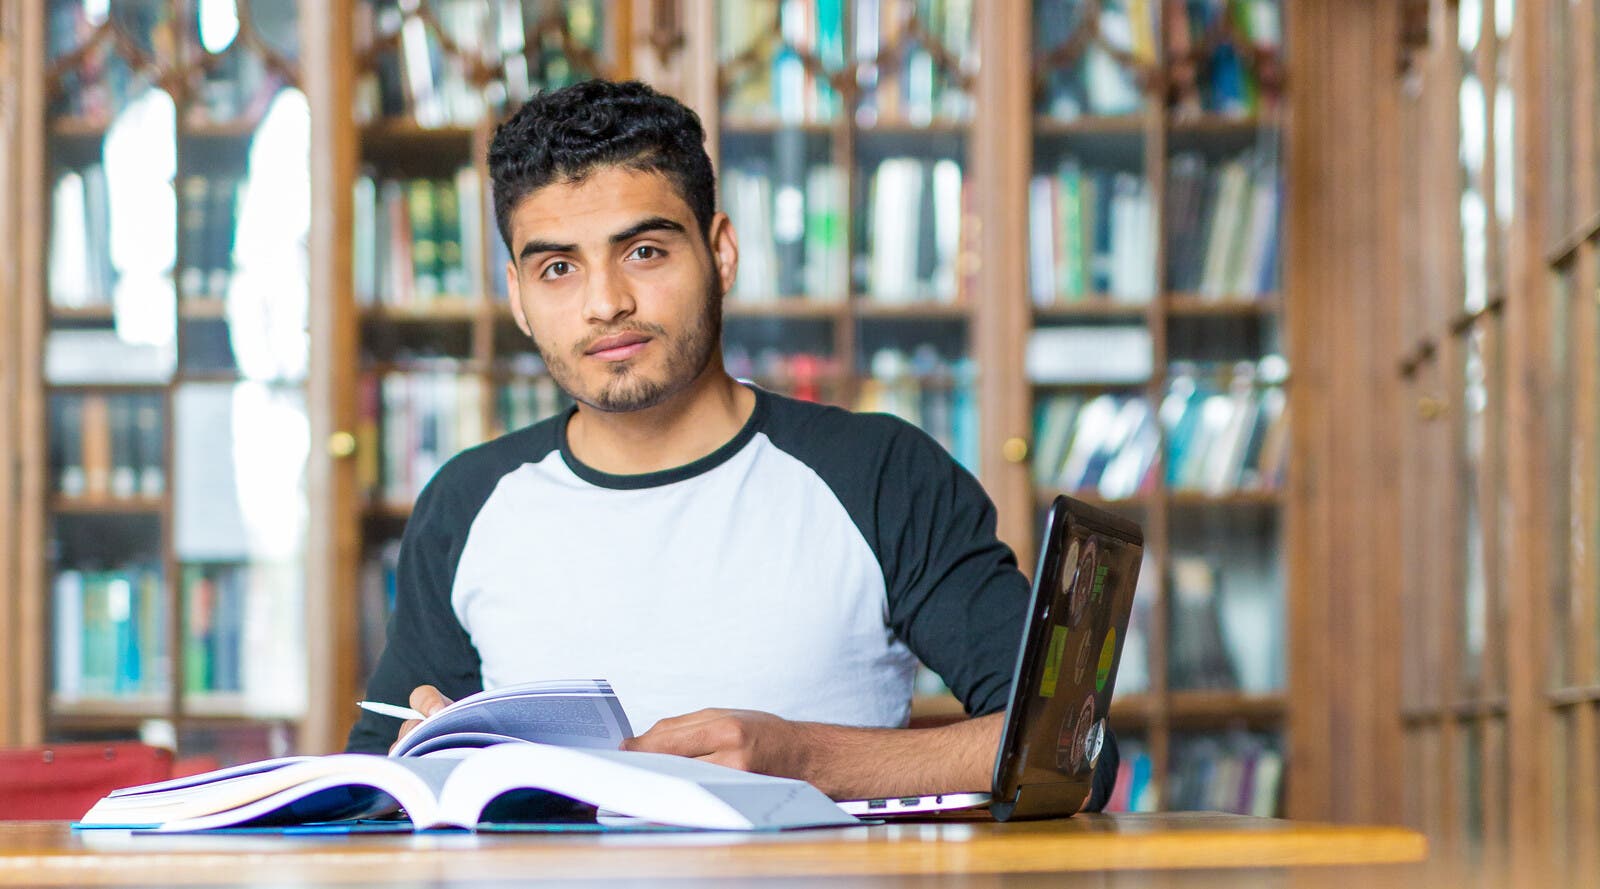 Israr, from Pakistan, in a library.